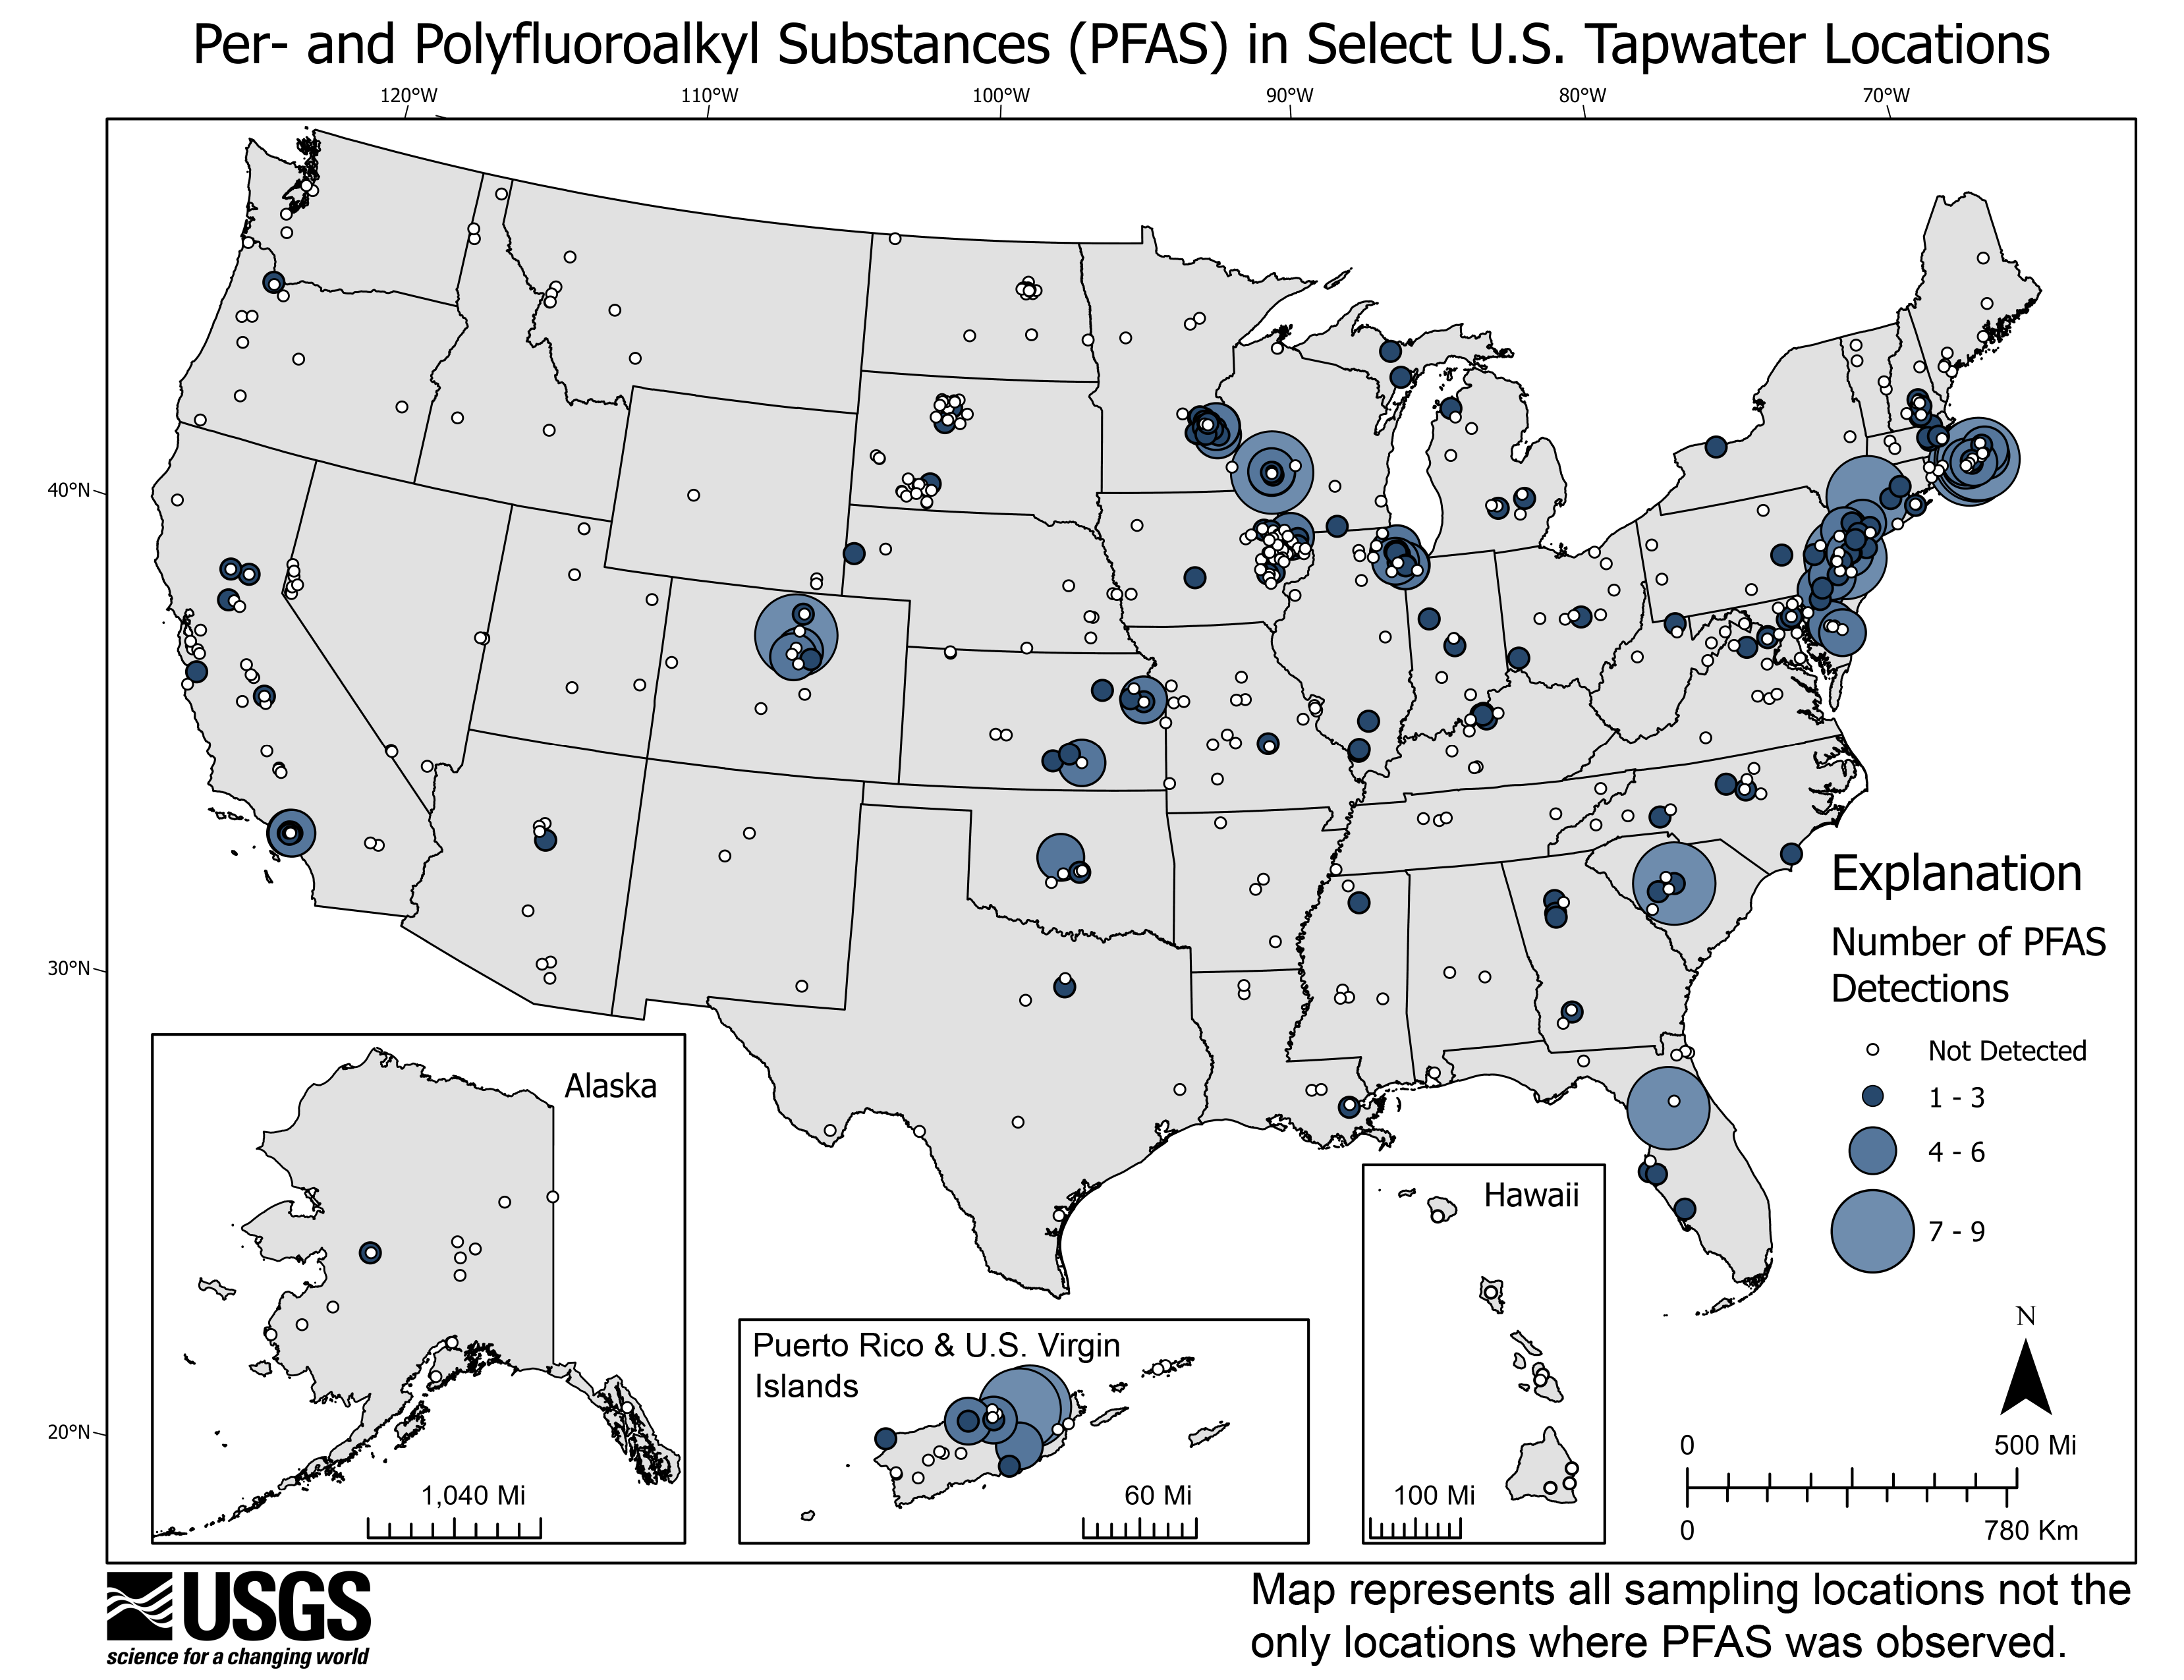 USGS Study Detects PFAS Contamination in 45% of Tap Water